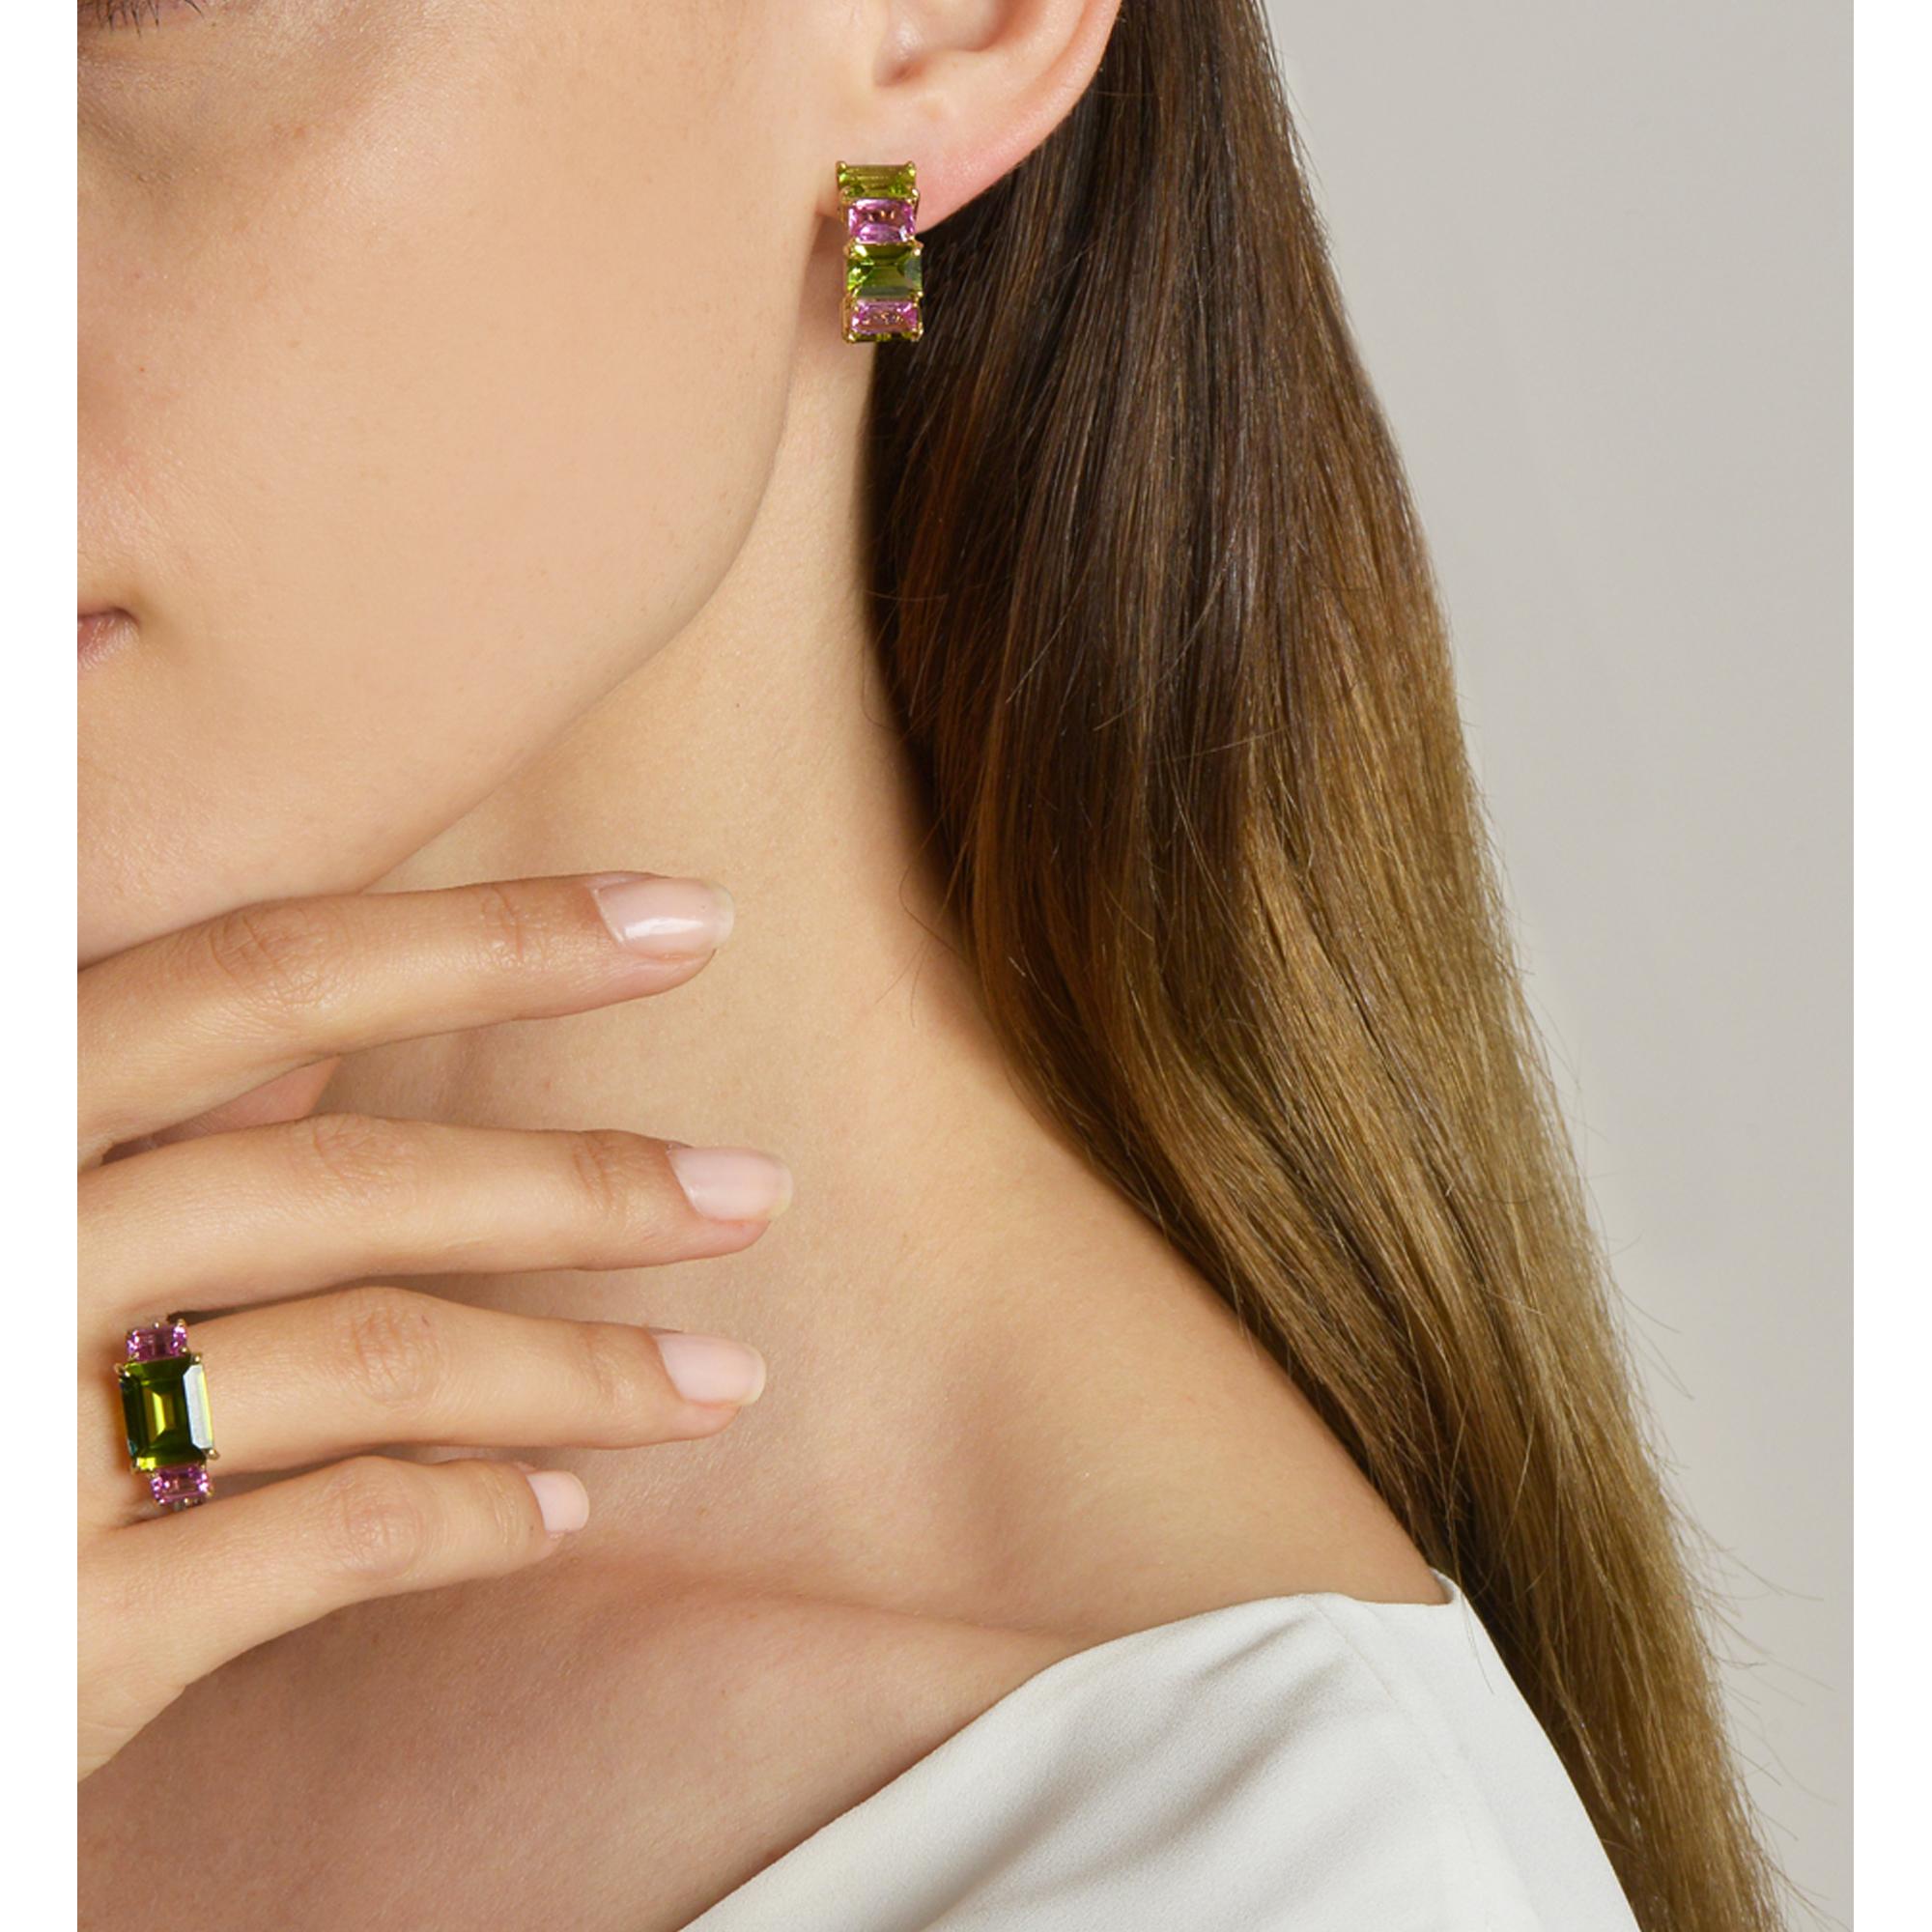 18kt yellow gold Florentine earrings set with emerald-cut peridots and pink sapphires.

Inspired by the Garden of the Iris, the Florentine collection pairs bold color combinations of geometric gemstones to translate Paolo Costagli's memories of